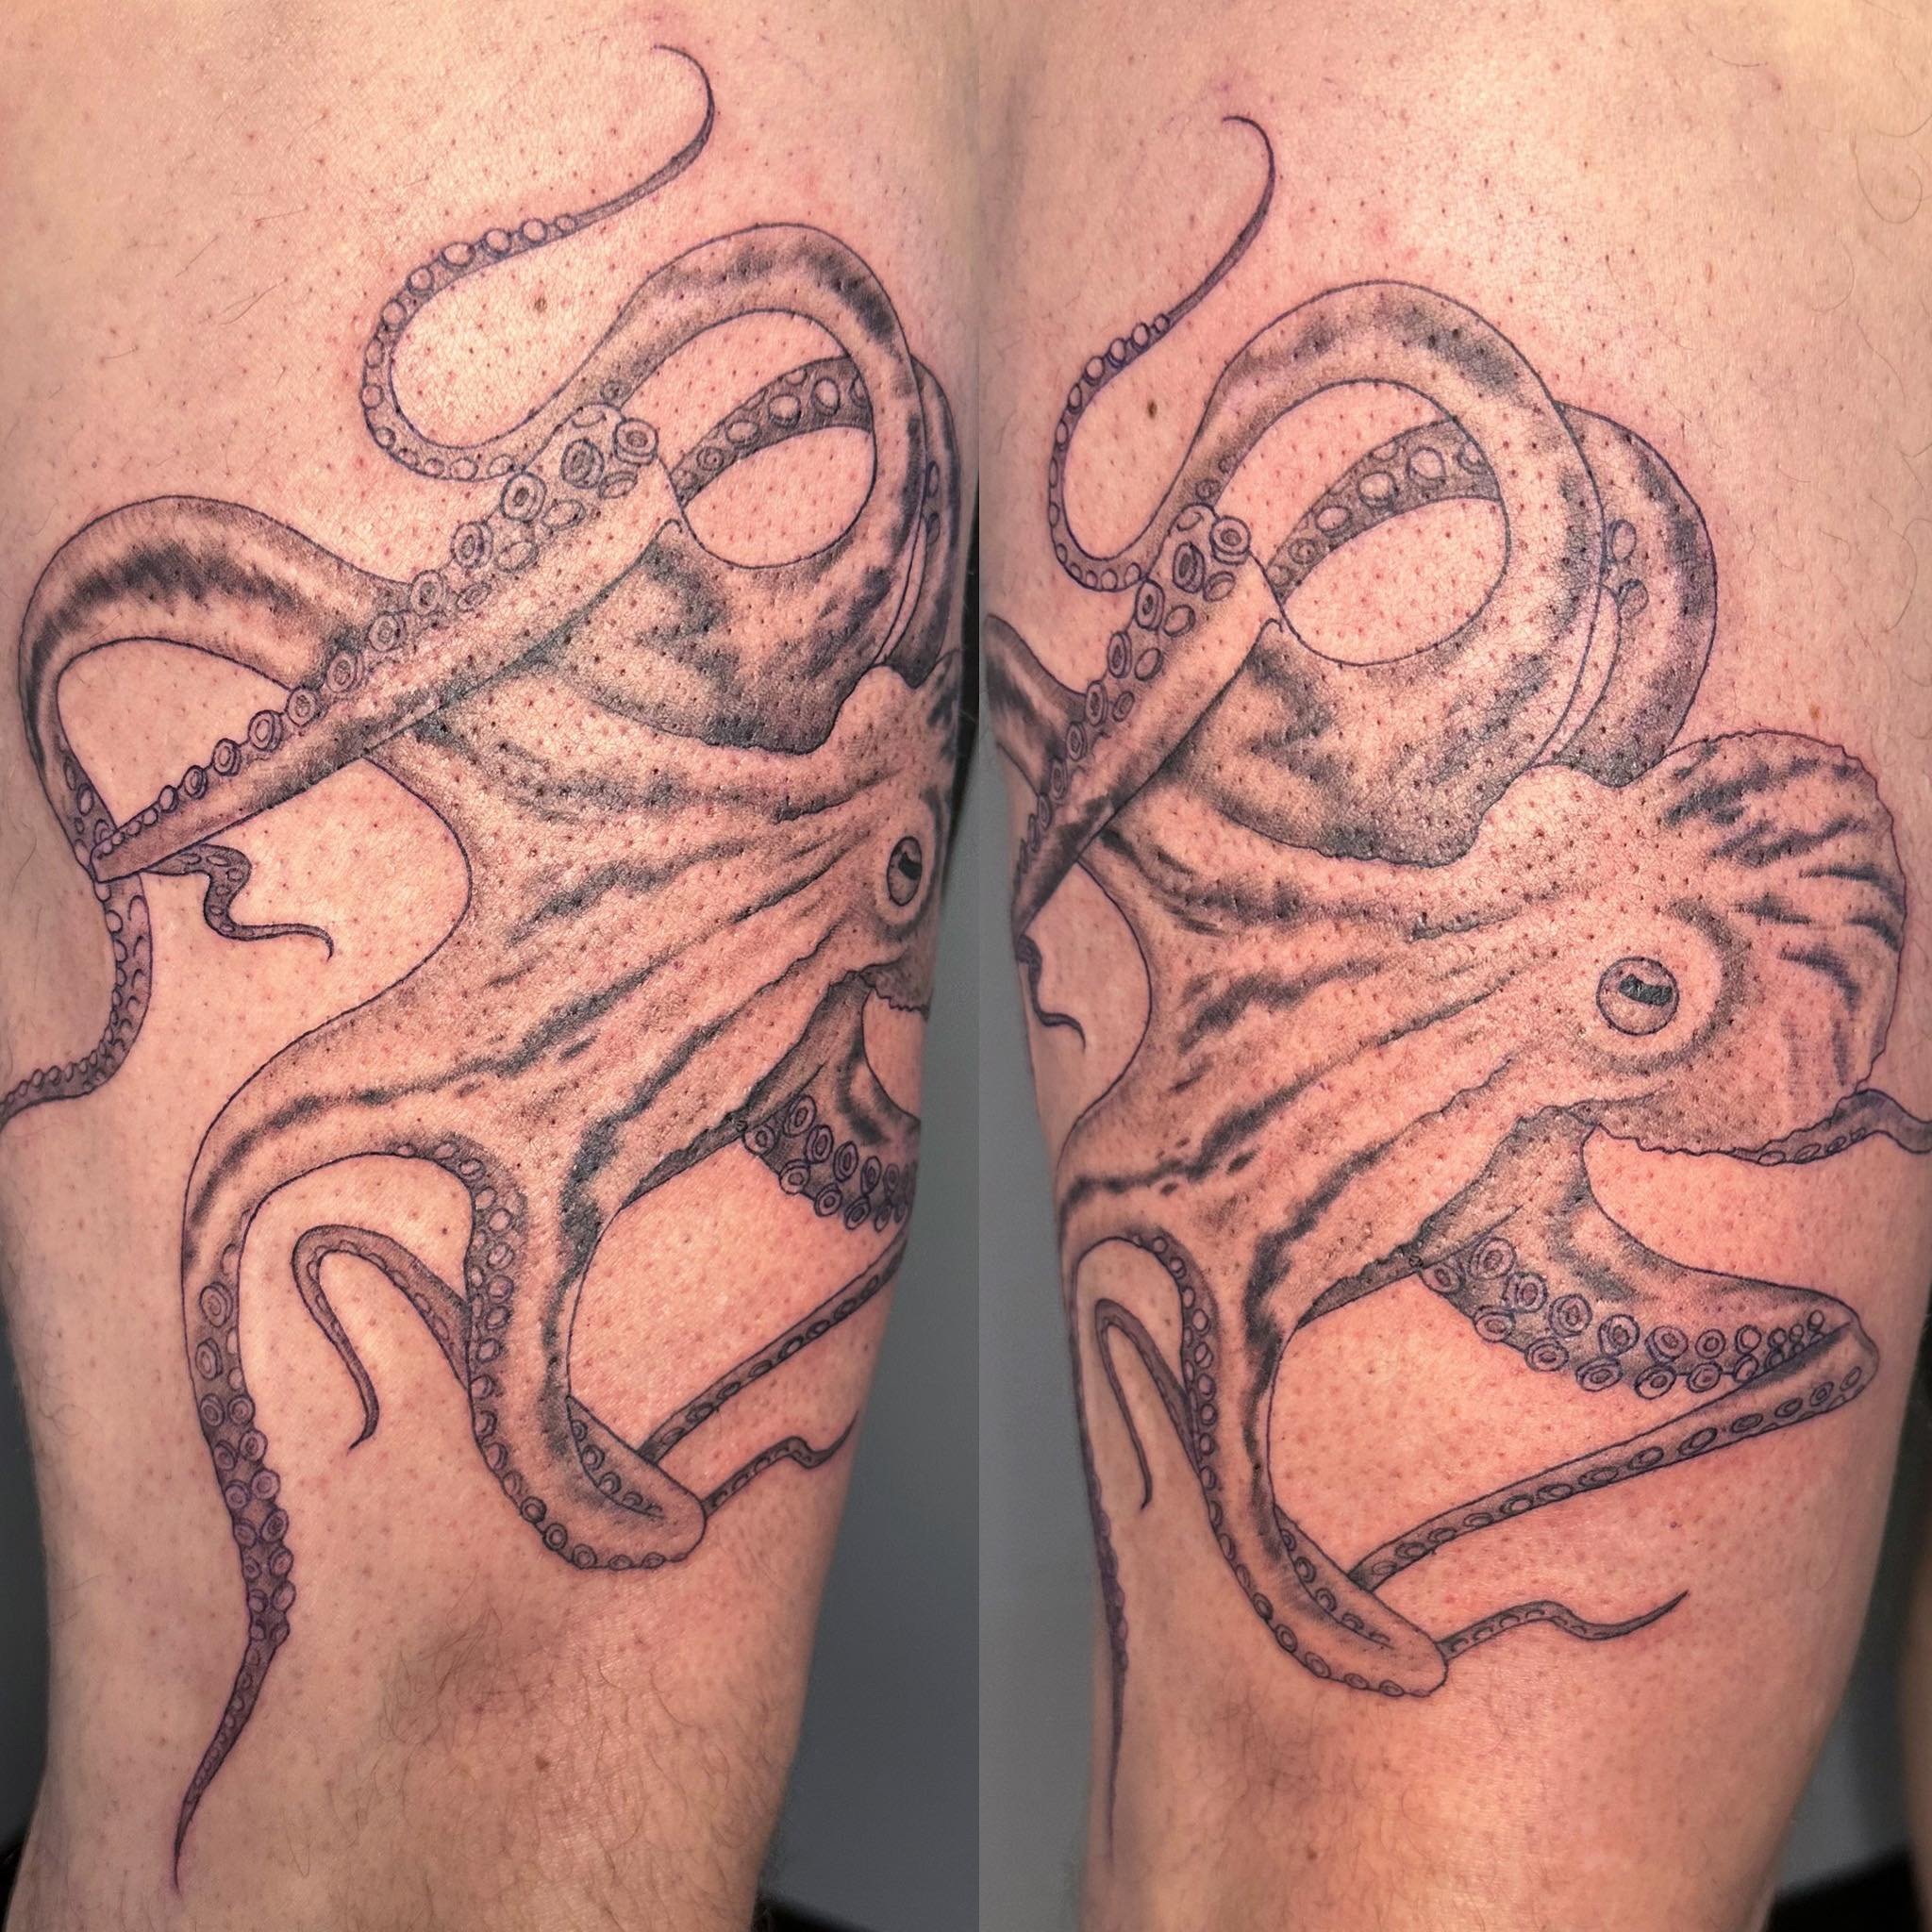 Started my week with this cool octopus #octopustattoo #thightattoo